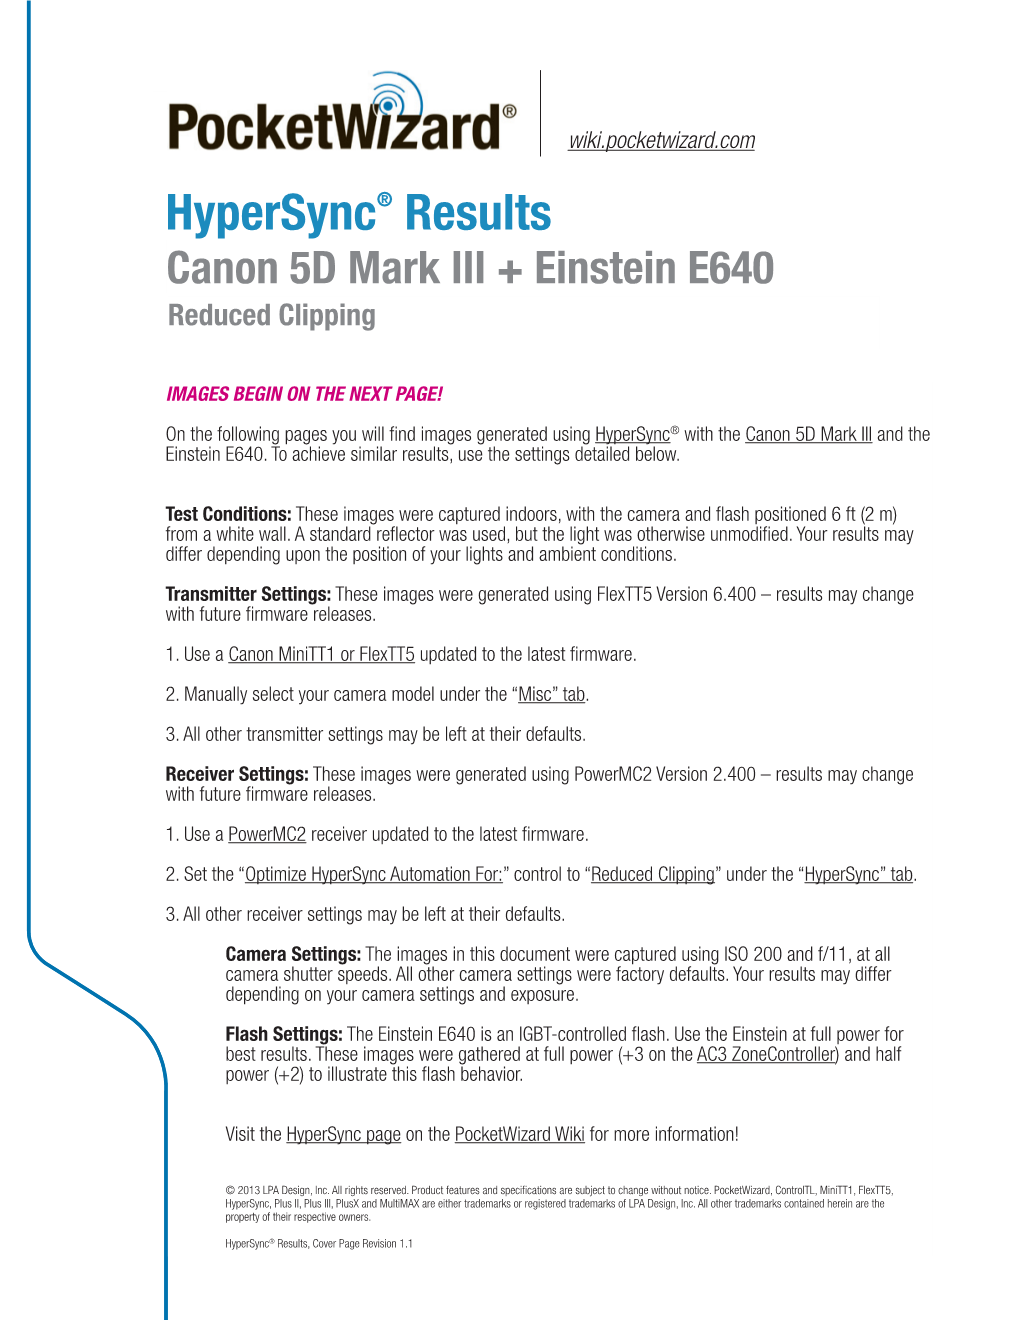 Hypersync® Results Canon 5D Mark III + Einstein E640 Reduced Clipping